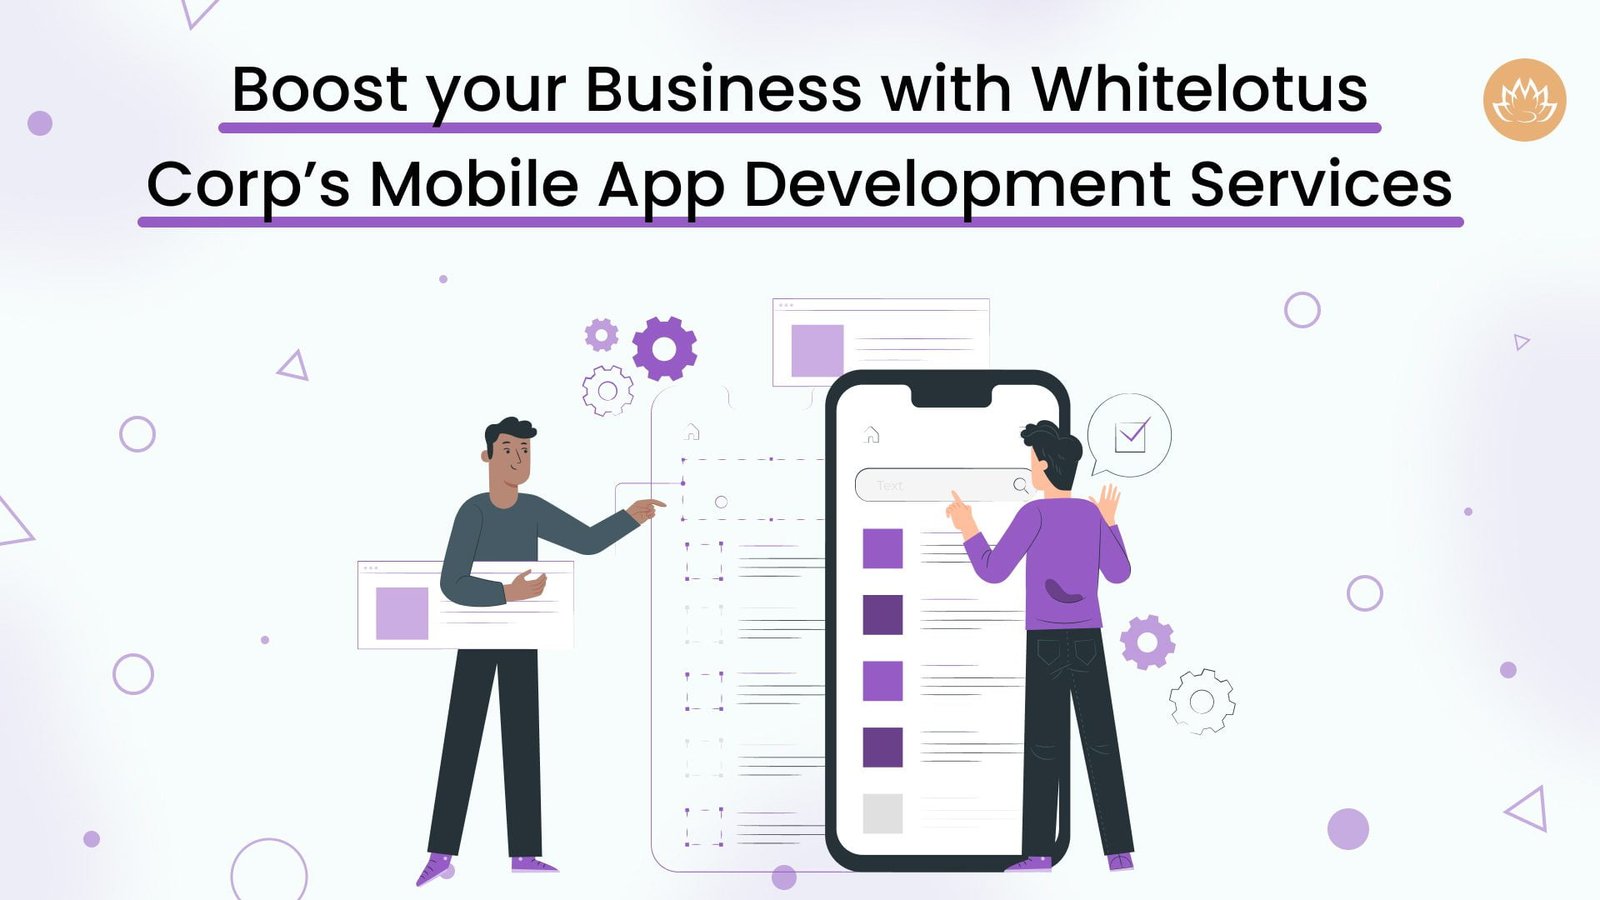 Boost your Business with Whitelotus Corp’s Mobile App Development Services